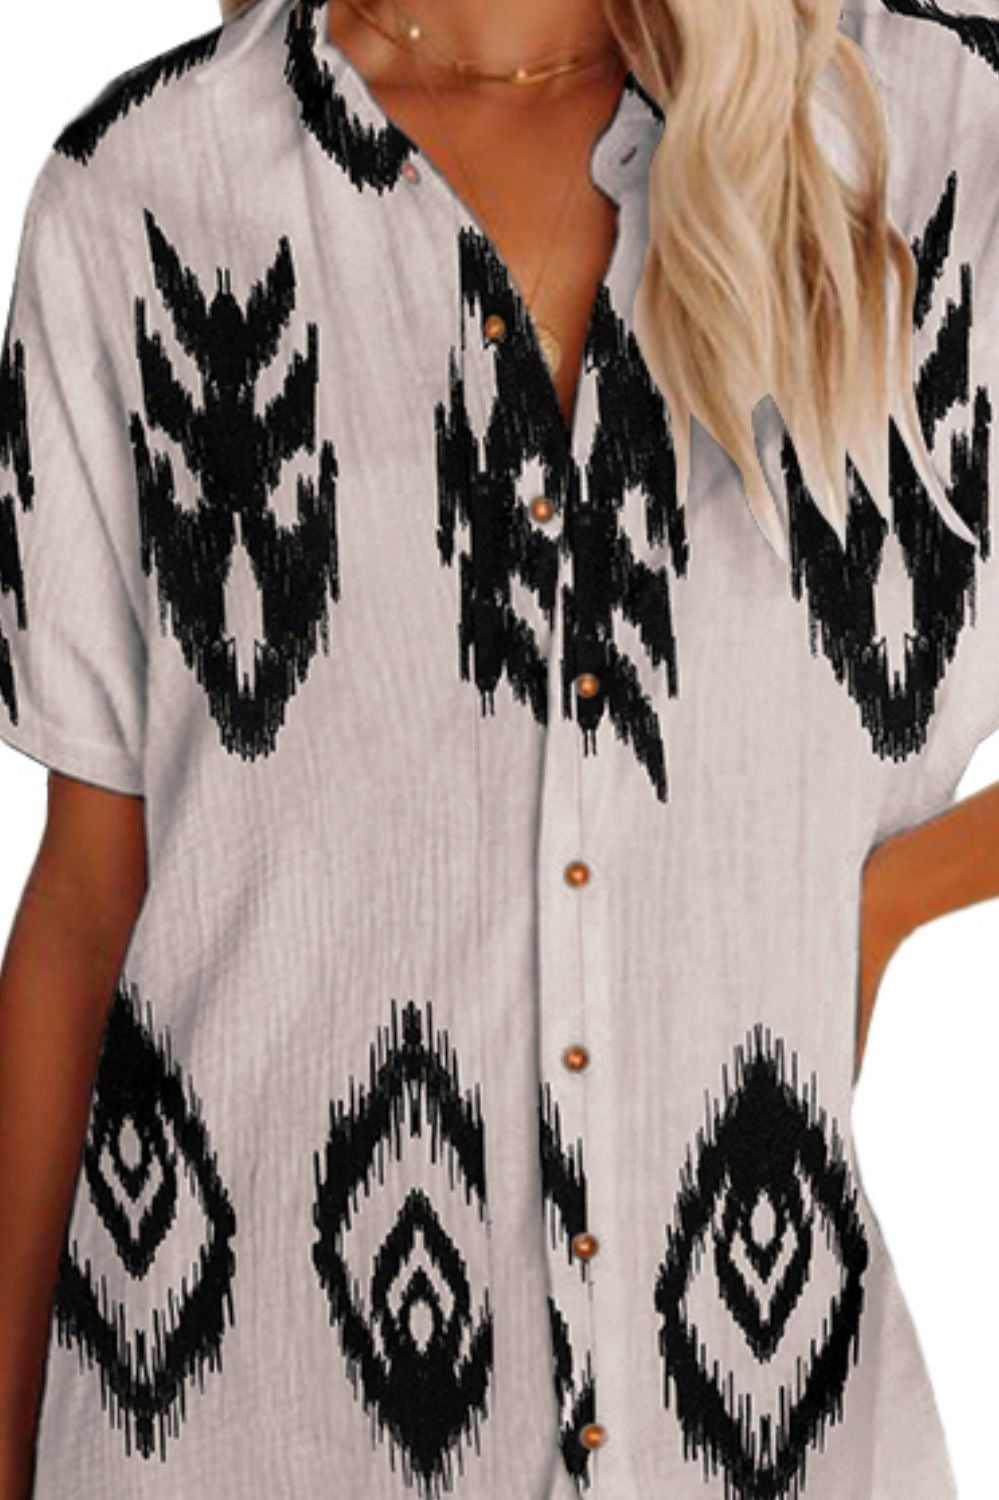 Geometric Button Up Short Sleeve Cover Up Casual Chic Boutique